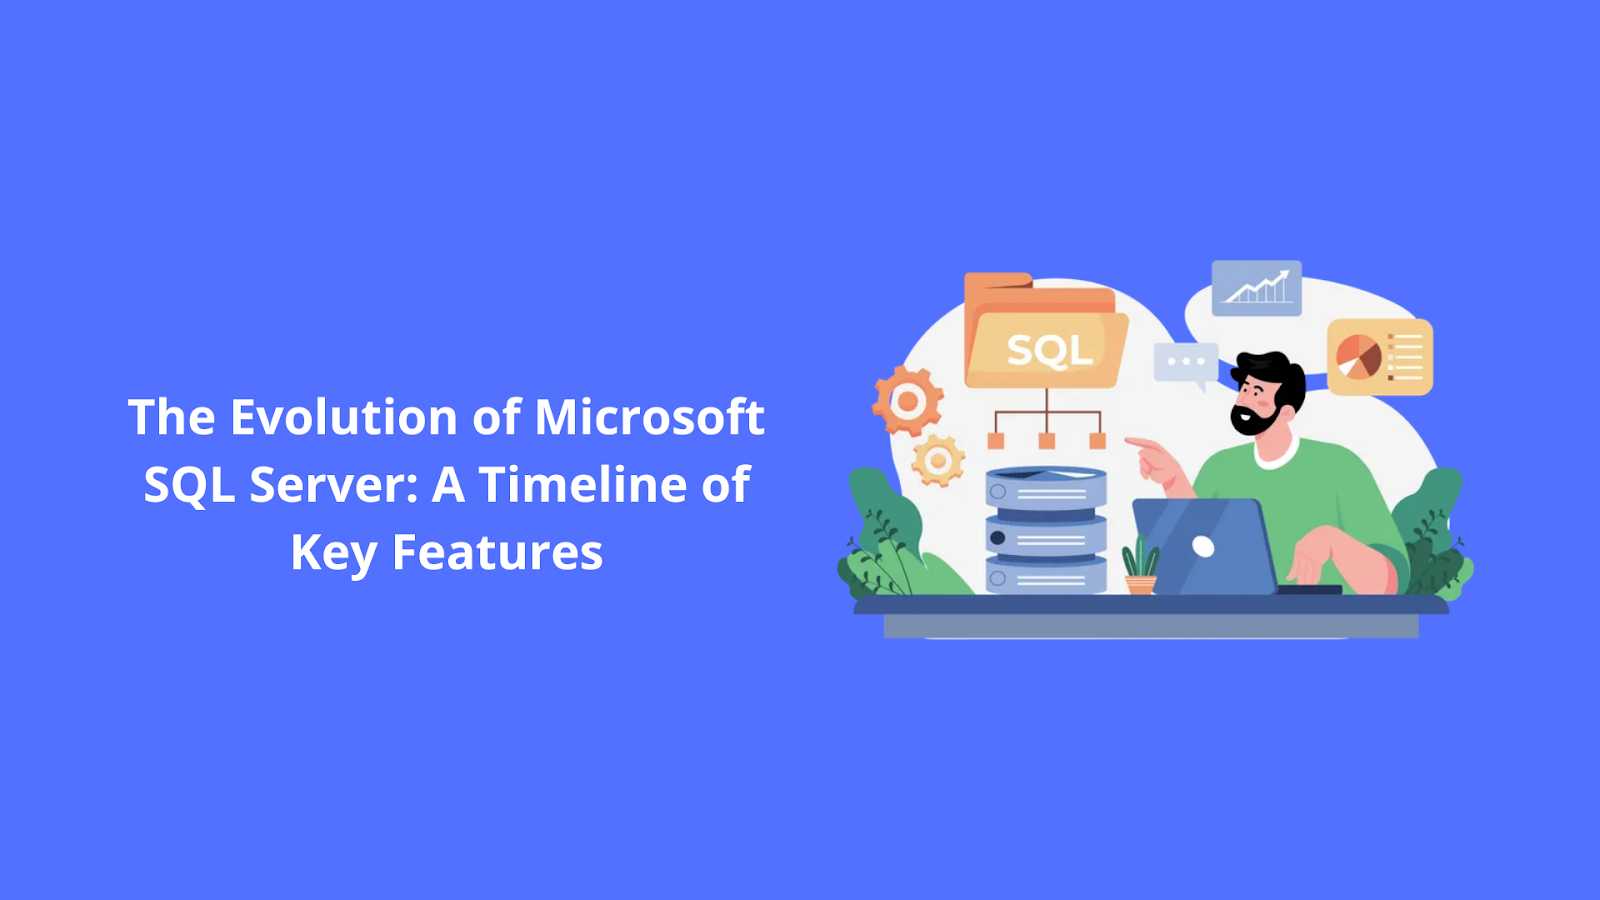 The Evolution of Microsoft SQL Server: A Timeline of Key Features